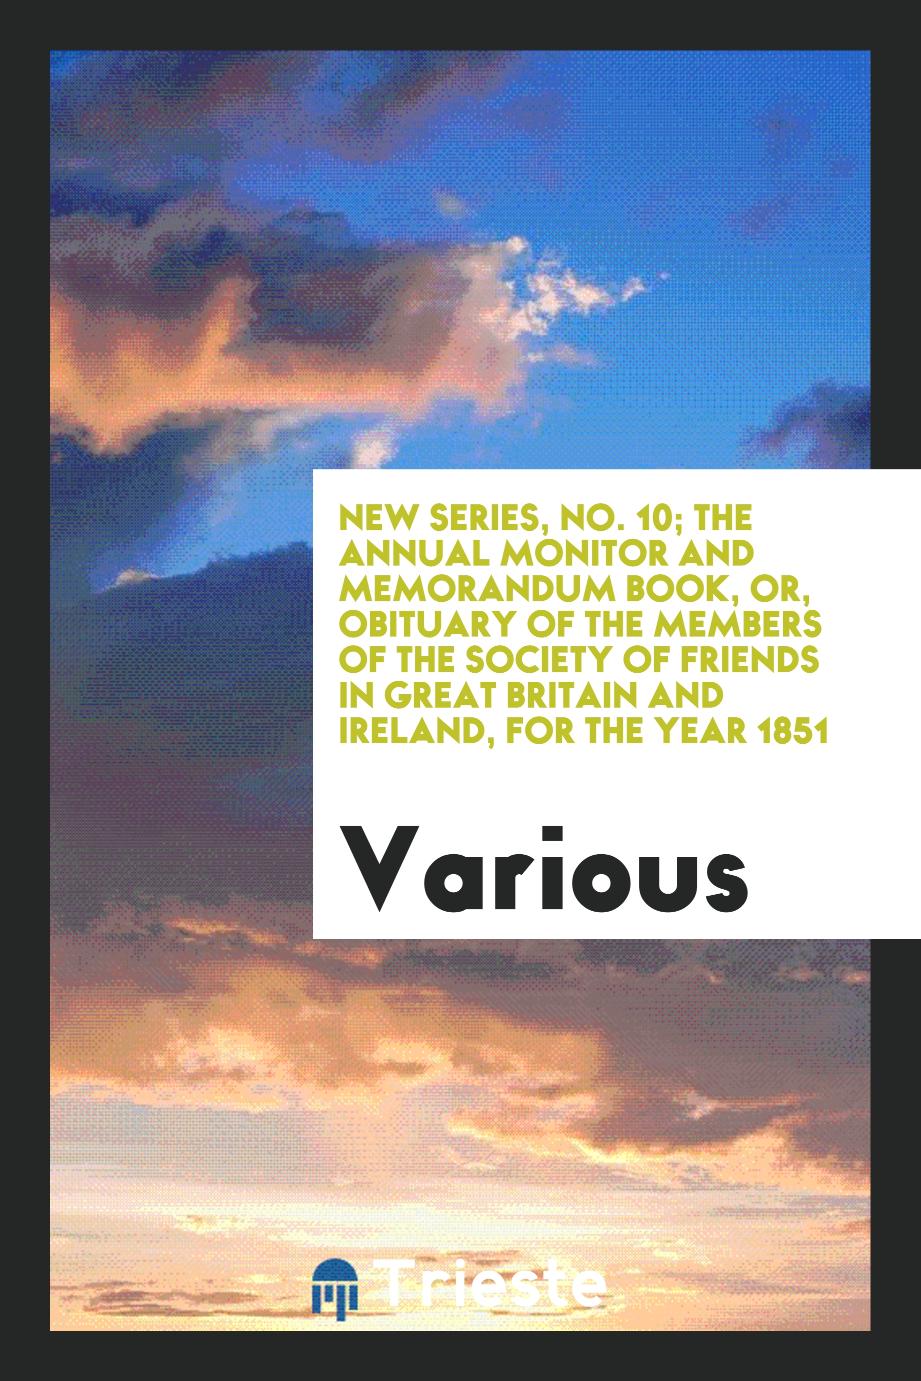 New Series, No. 10; The Annual Monitor and Memorandum Book, or, Obituary of the Members of the Society of Friends in Great Britain and Ireland, for the Year 1851